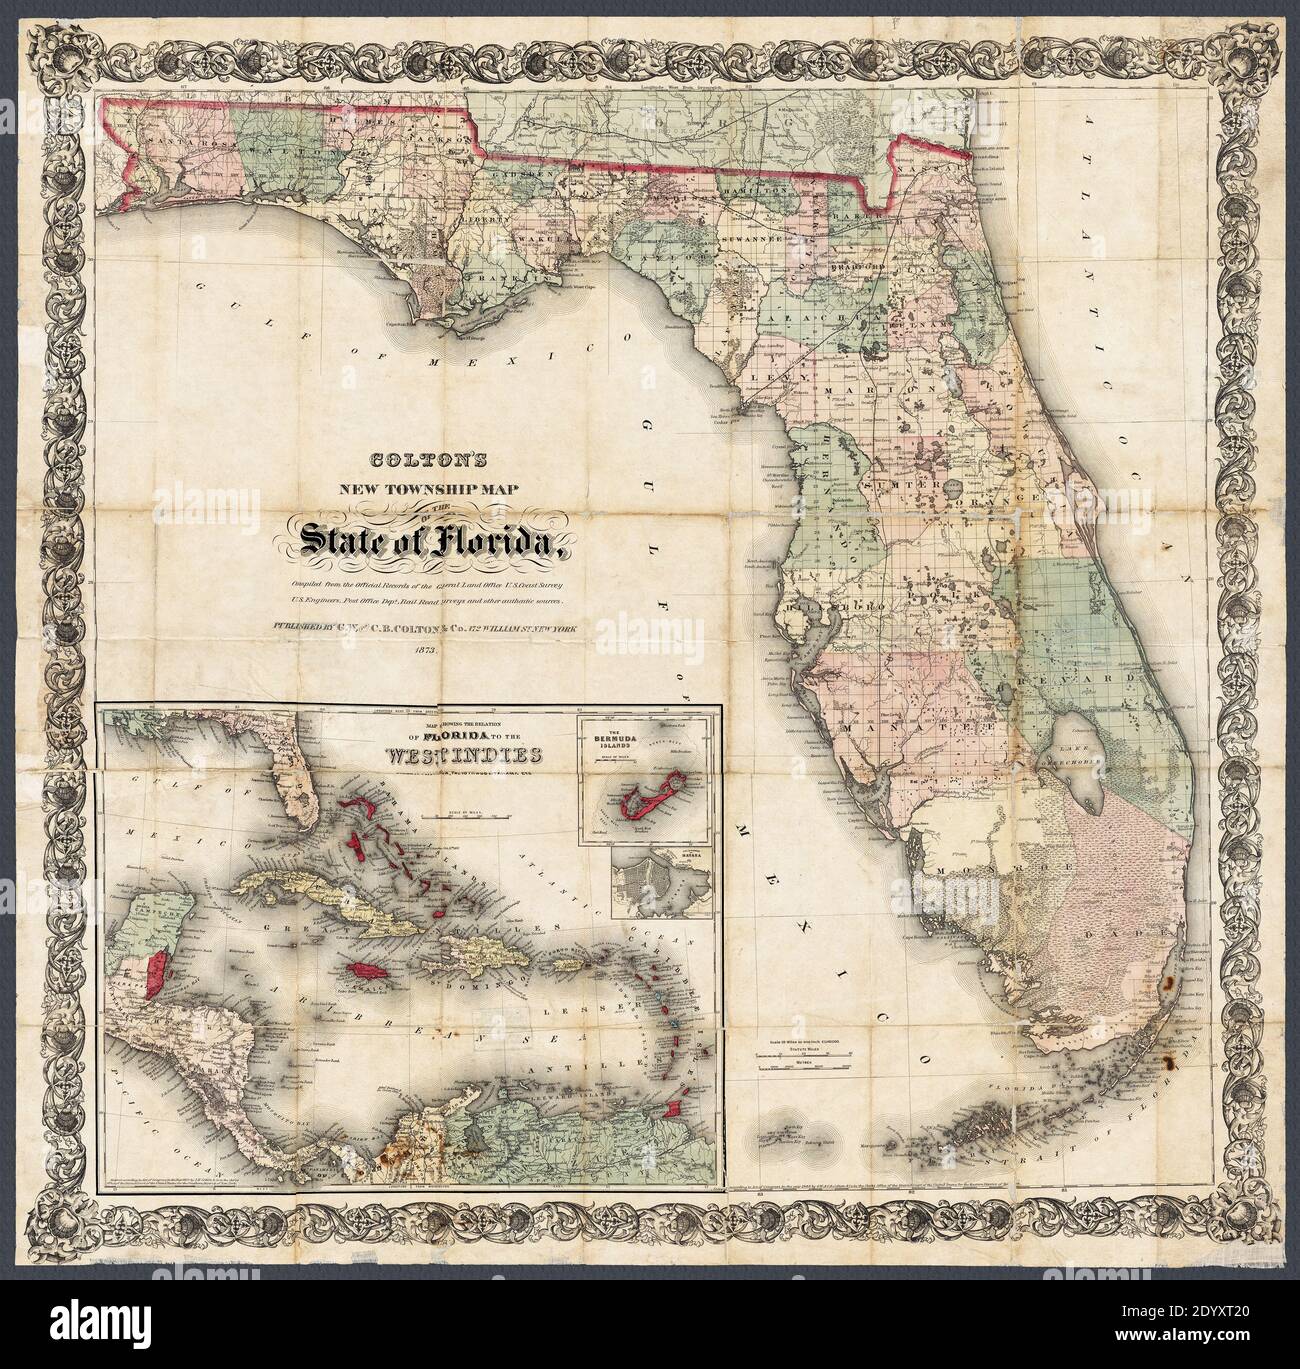 Title of original source: 'Colton's new township map of the state of Florida.' This circa 1873 detailed map includes a maps of the Caribbean, Bermuda, and the city of Havana. Also shows railroads, lakes, swamps, and counties. Stock Photo